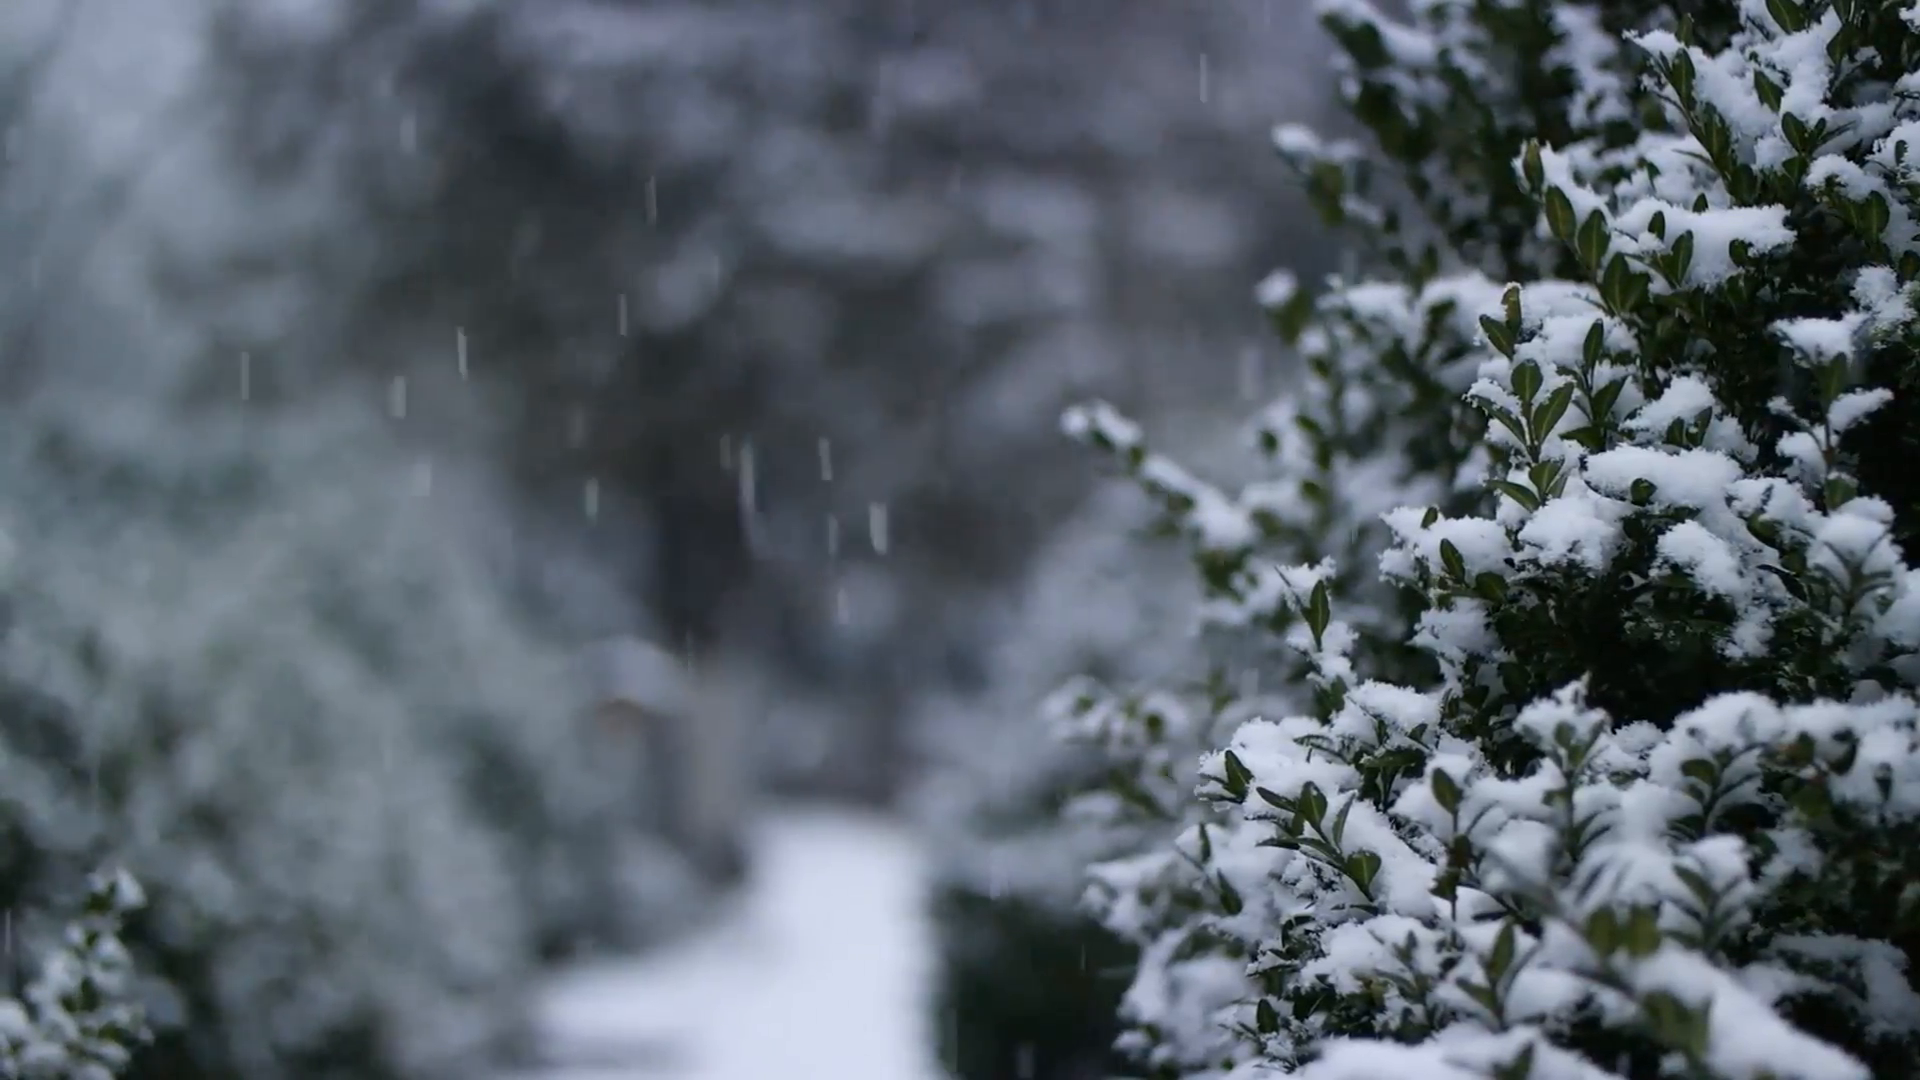 snow falling near green bushes - 60 fps slow motion Stock Video ...